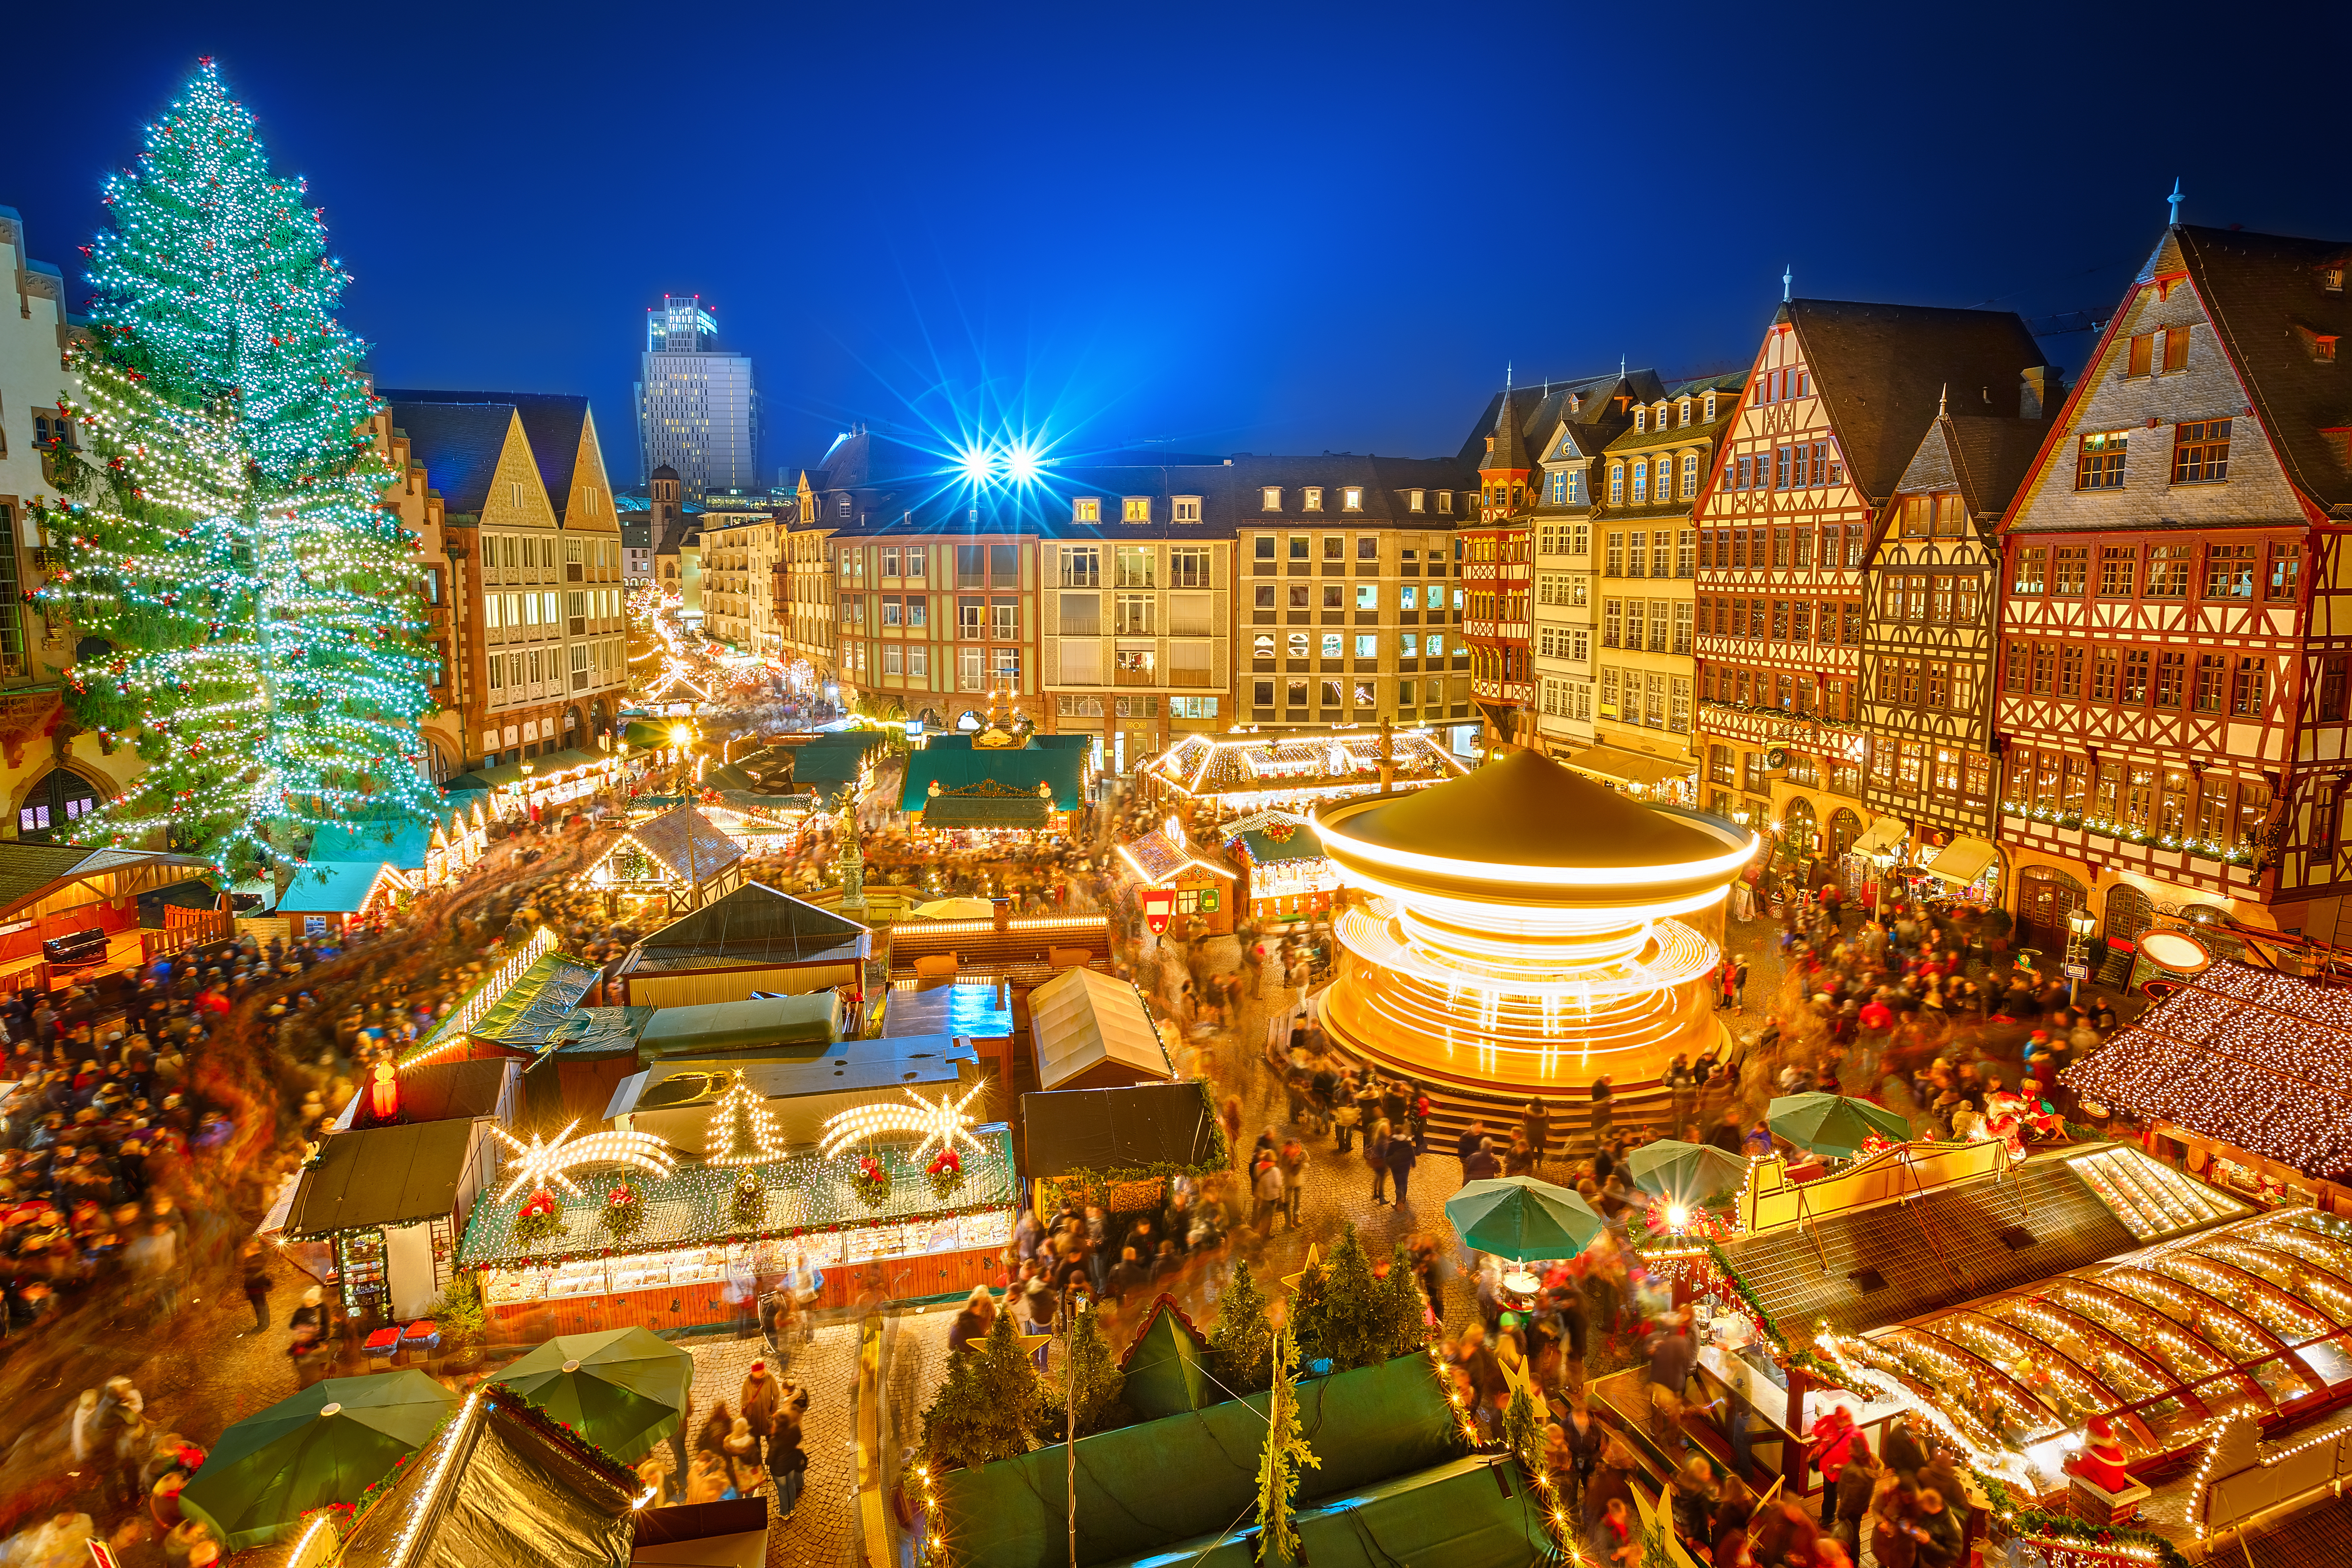 Traditional christmas market in the historic center of Frankfurt. View from above at night